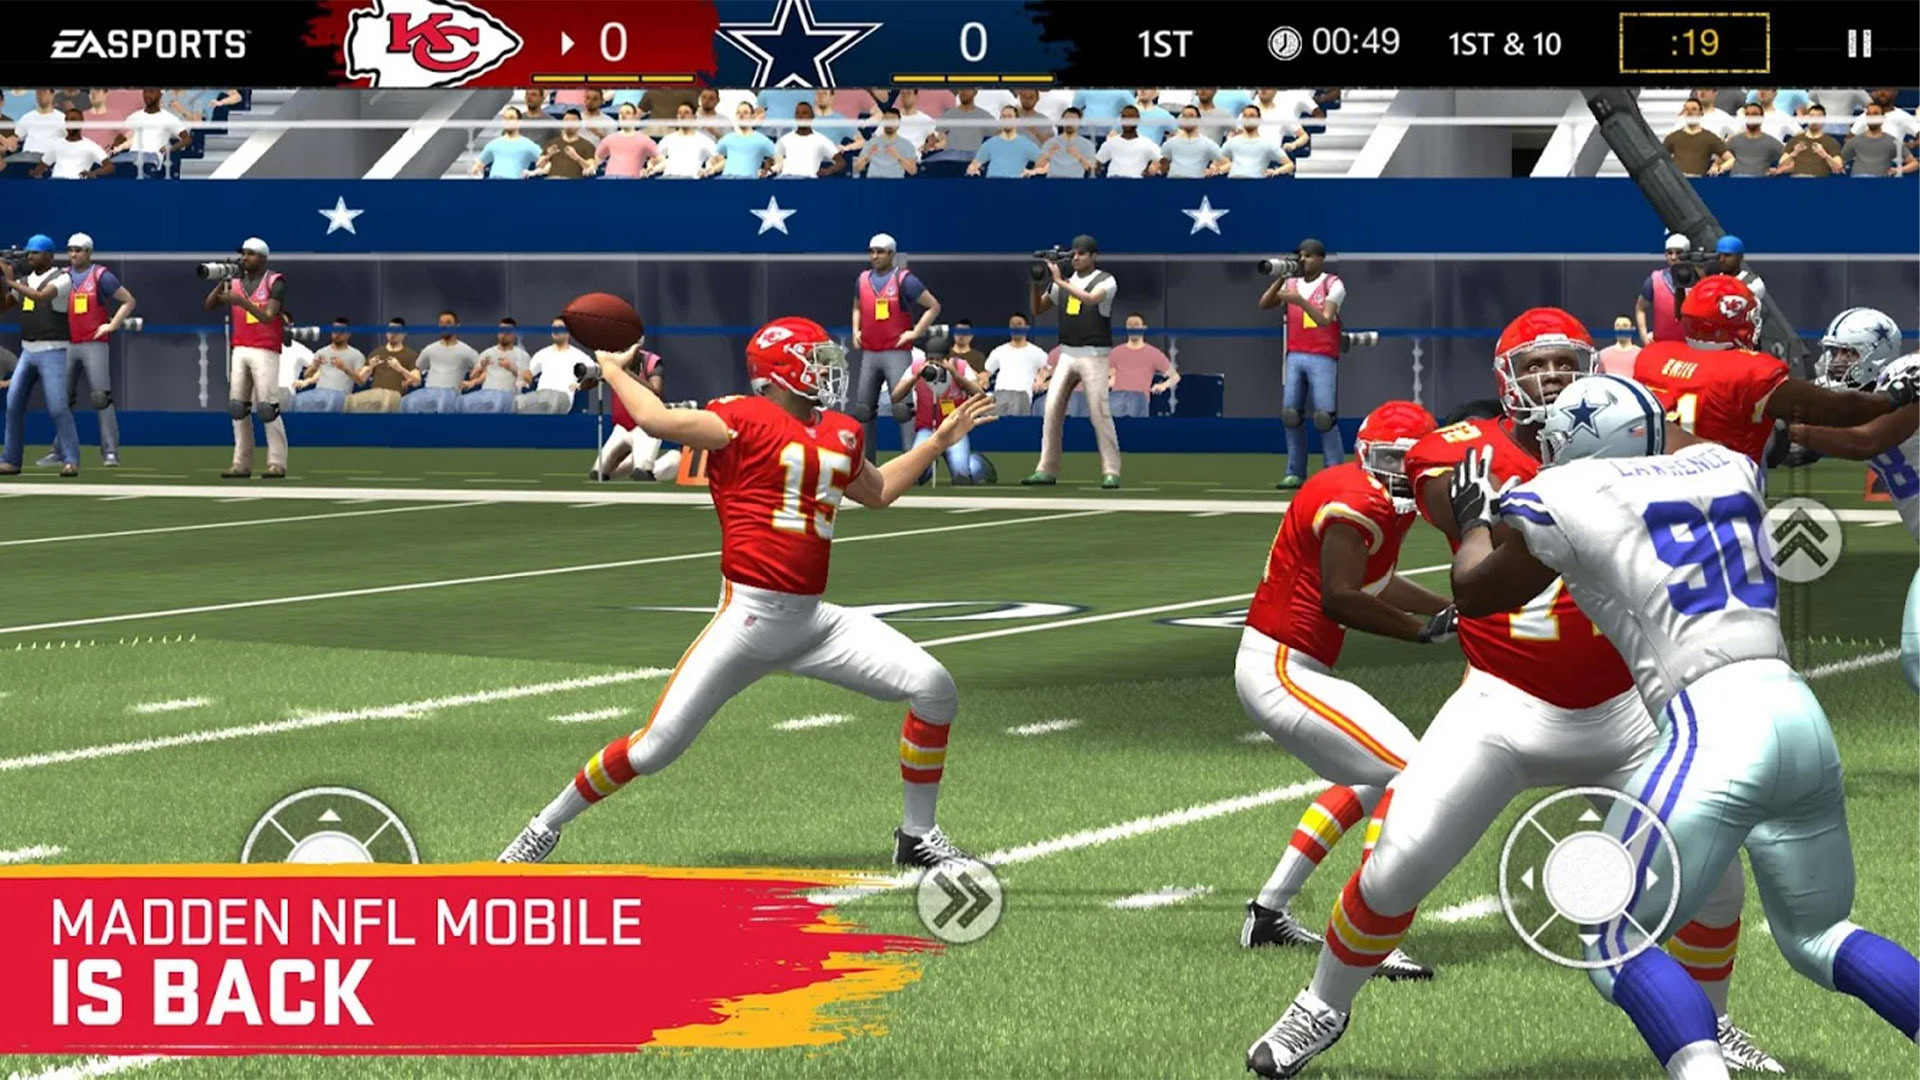 Perfect pass: The must download football games on Android and iOS